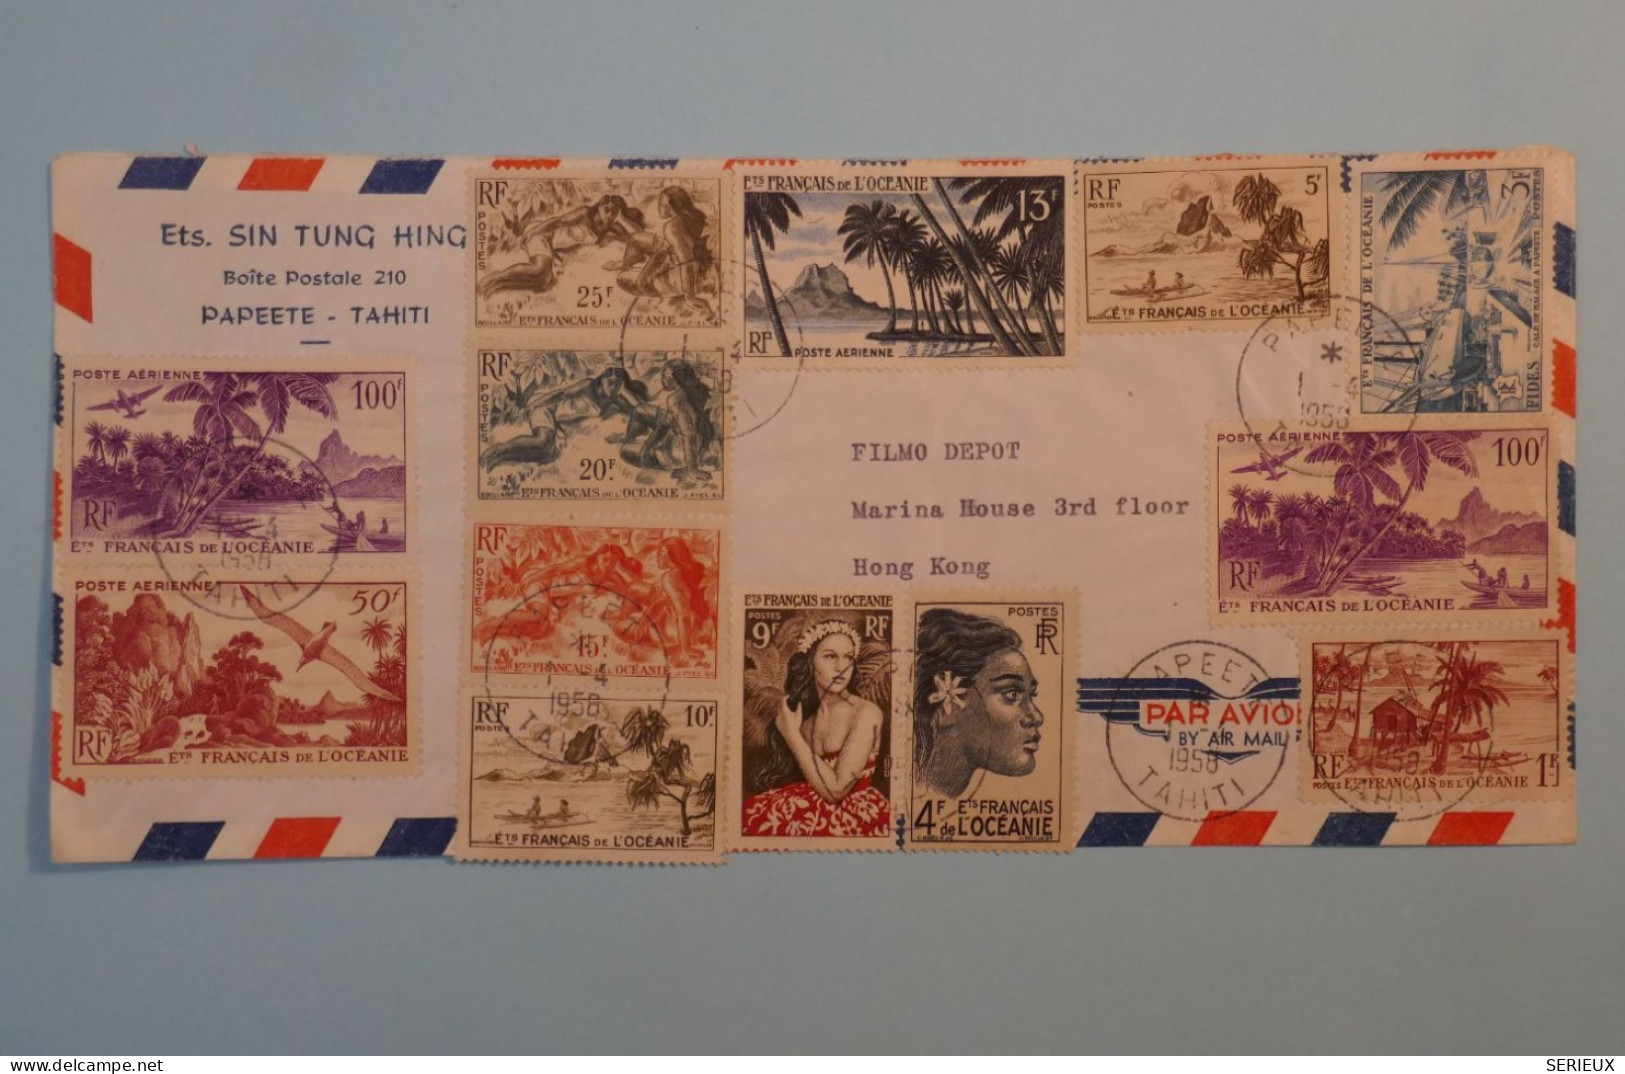 BT 16 ETAB. OCEANIE  BELLE LETTRE  RARE 1953 BY AIR MAIL  PAPEETE  A HONG KONG CHINA +AFFR SPECTACULAIRE +++ - Covers & Documents